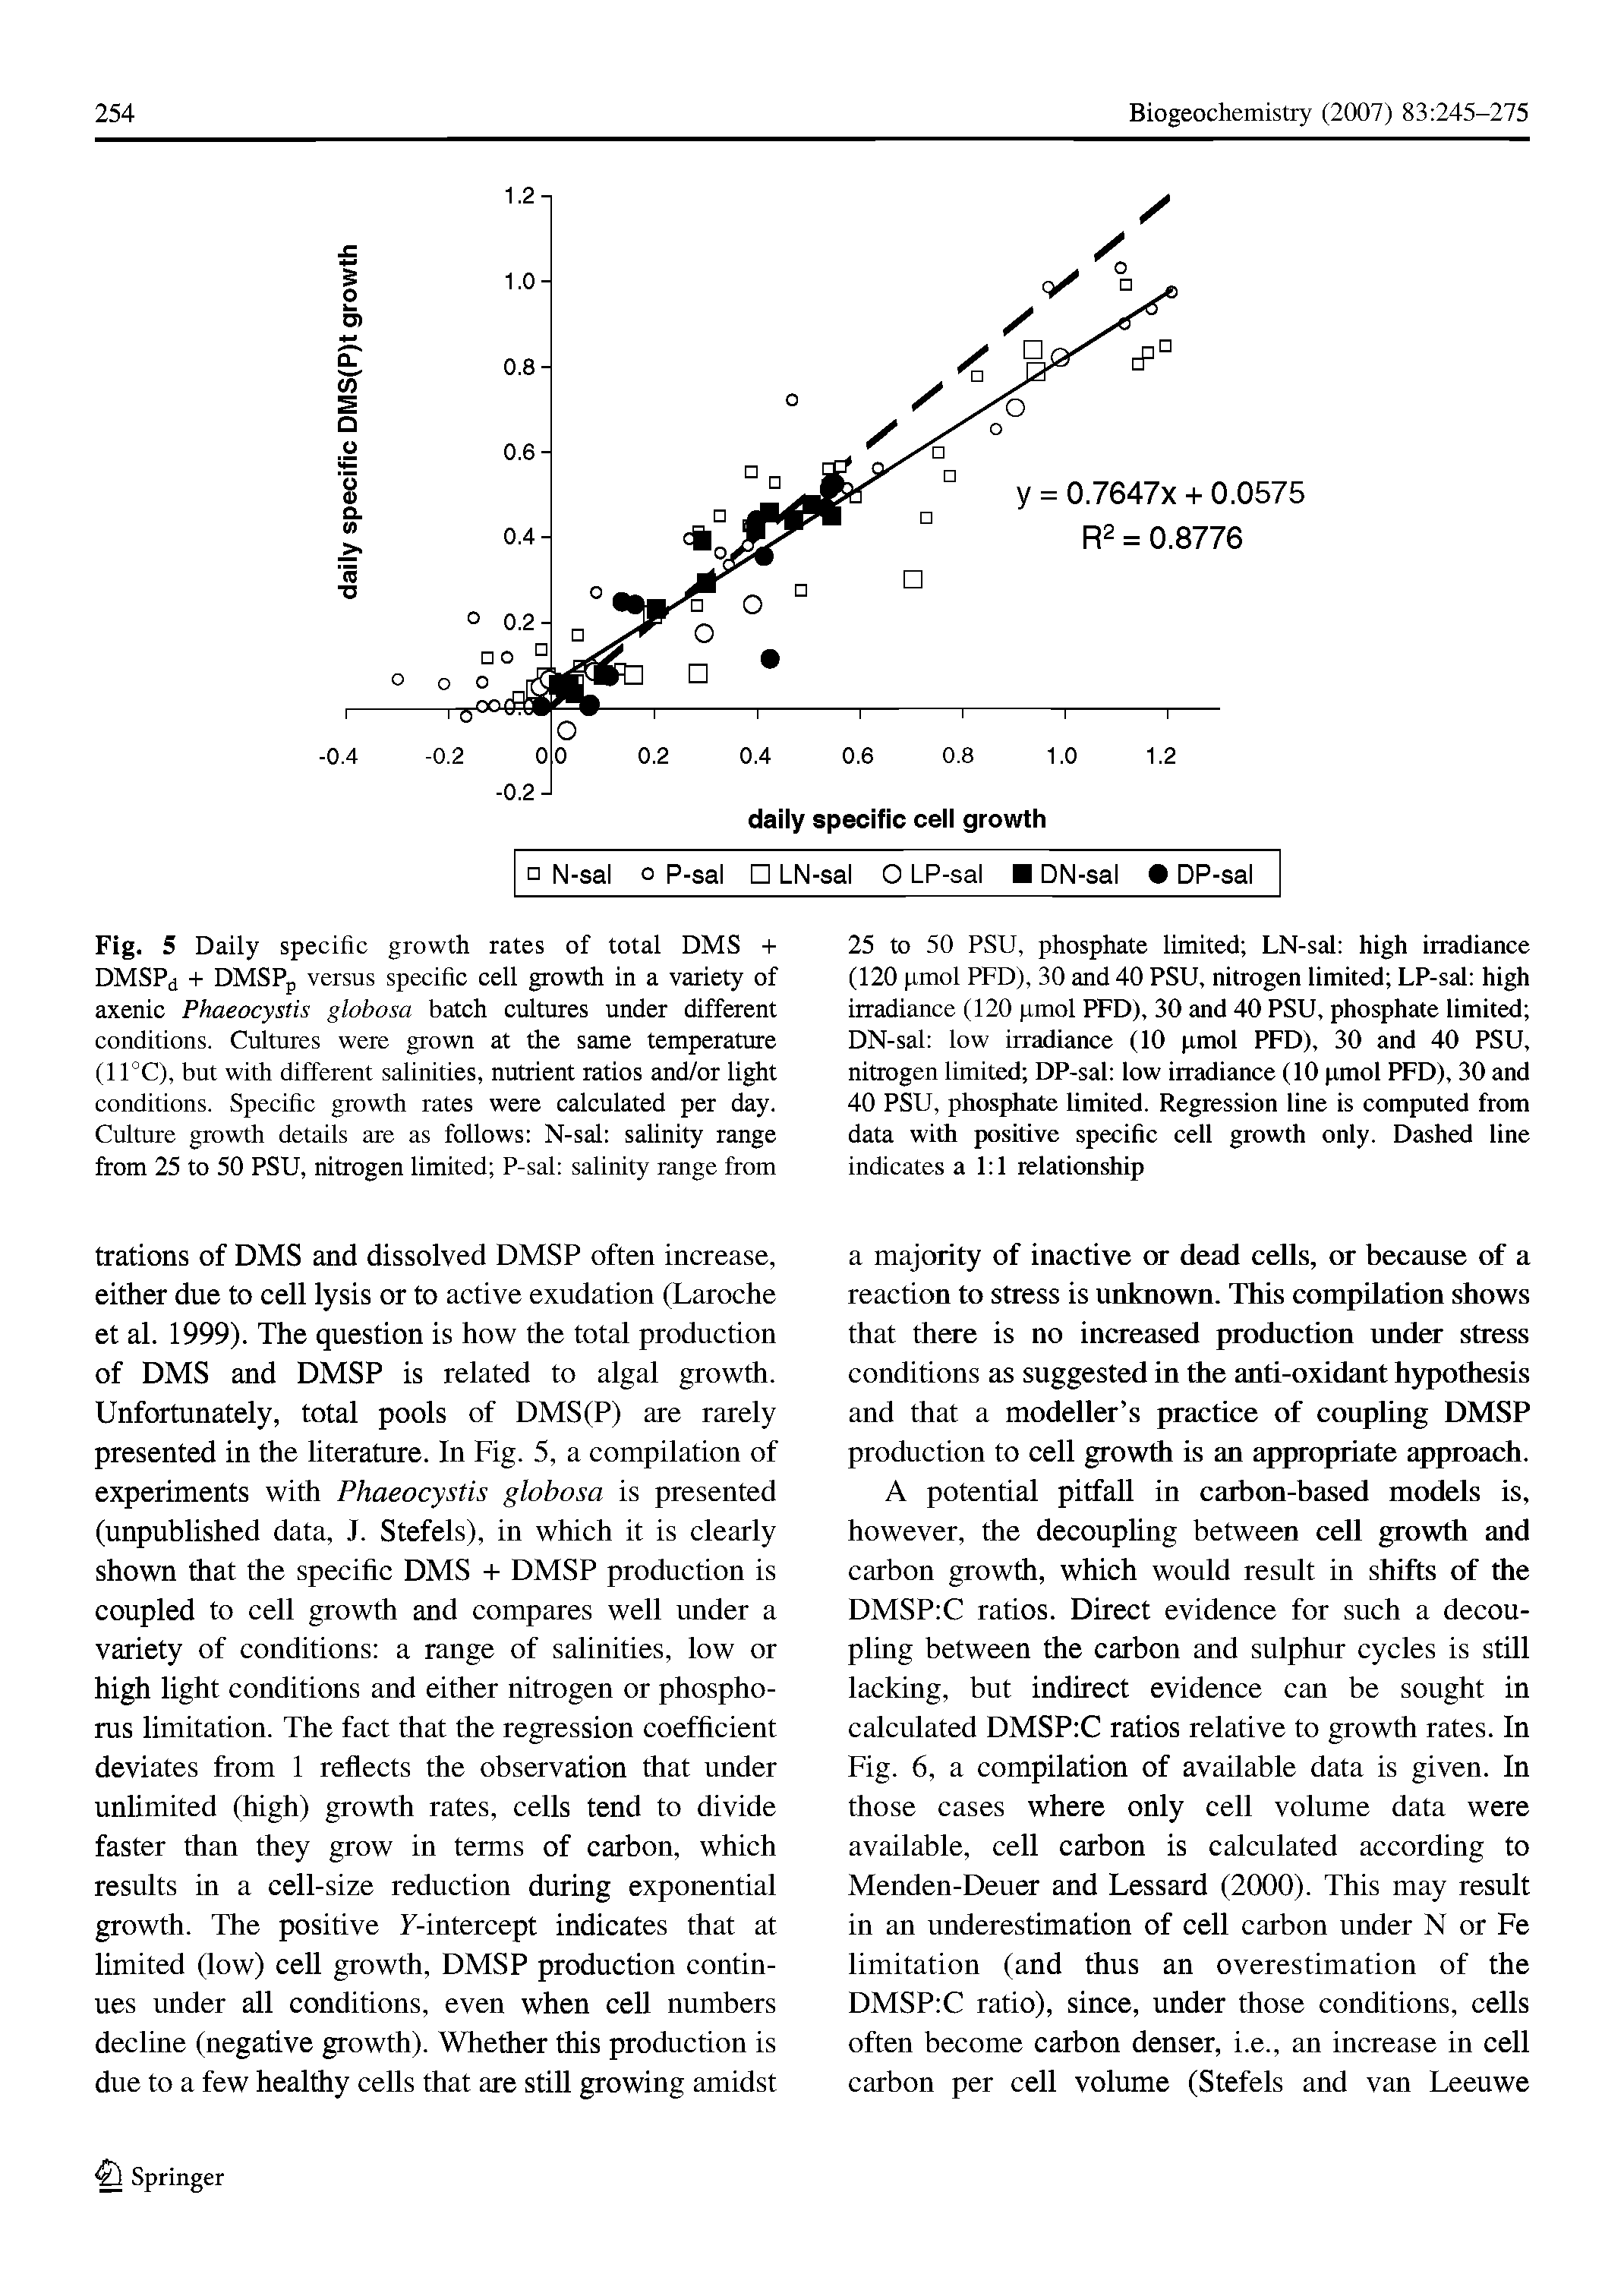 Fig. 5 Daily specific growth rates of total DMS + DMSPd + DMSPp versus specific cell growth in a variety of axenic Phaeocystis globosa batch cultures under different conditions. Cultures were grown at the same temperature (11°C), but with different salinities, nutrient ratios and/or light conditions. Specific growth rates were calculated per day. Culture growth details are as follows N-sal salinity range from 25 to 50 PSU, nitrogen limited P-sal salinity range from...